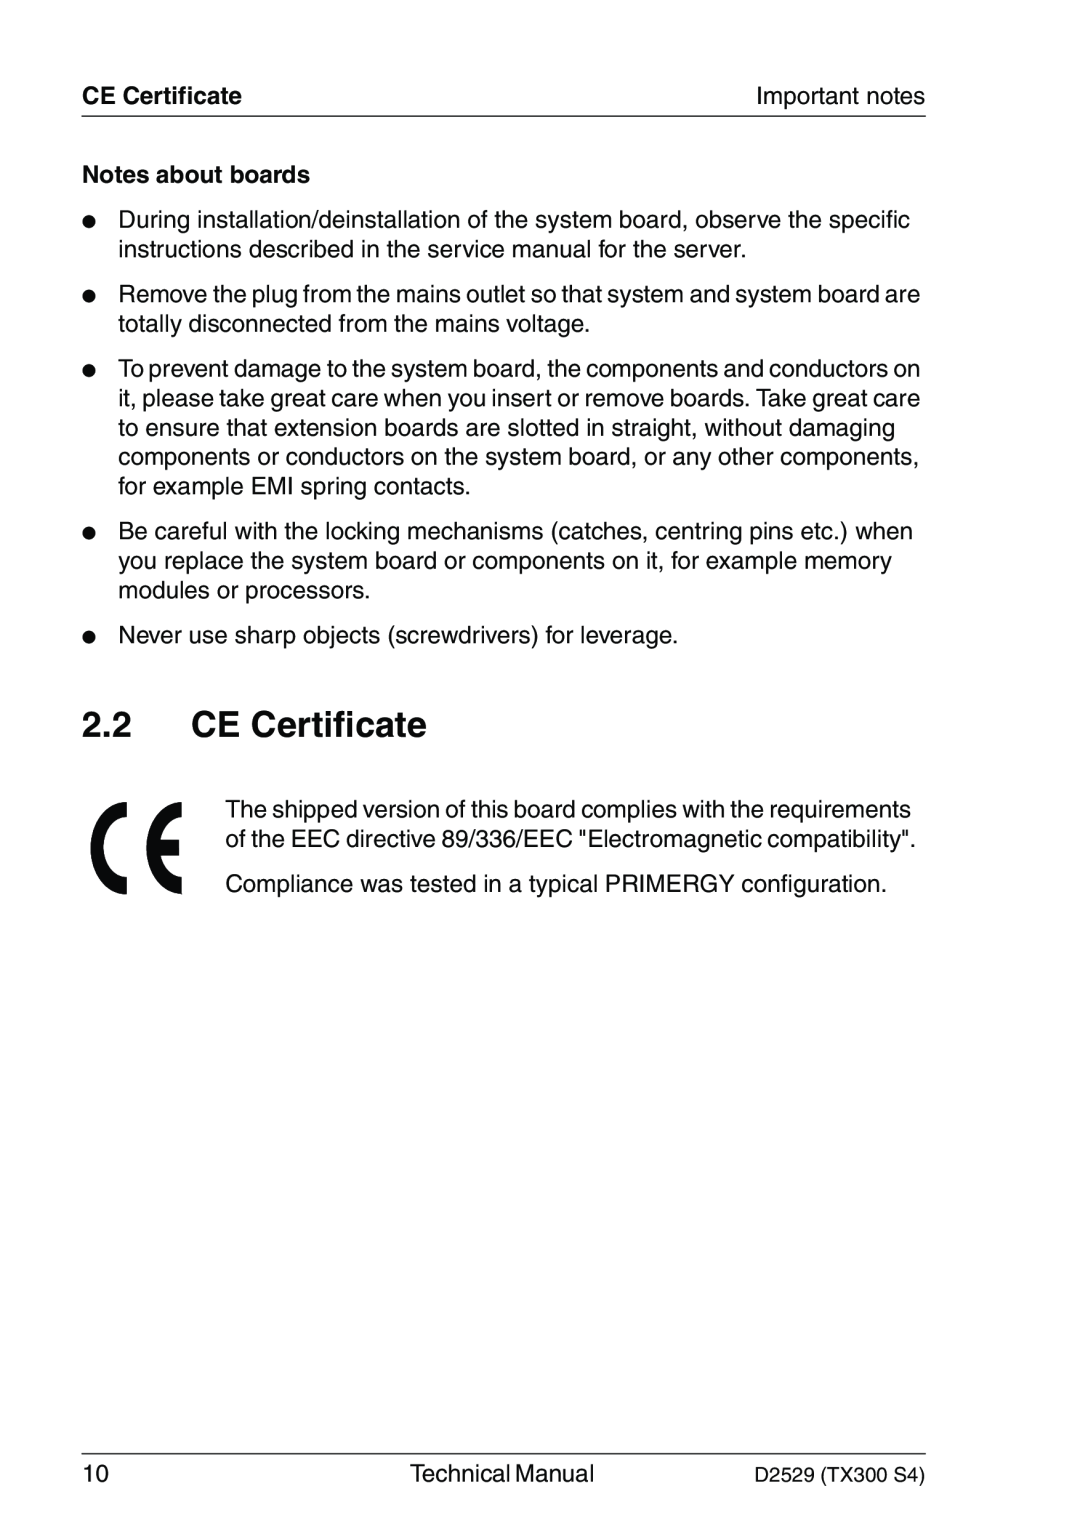 Fujitsu D2529 technical manual CE Certificate, Notes about boards 